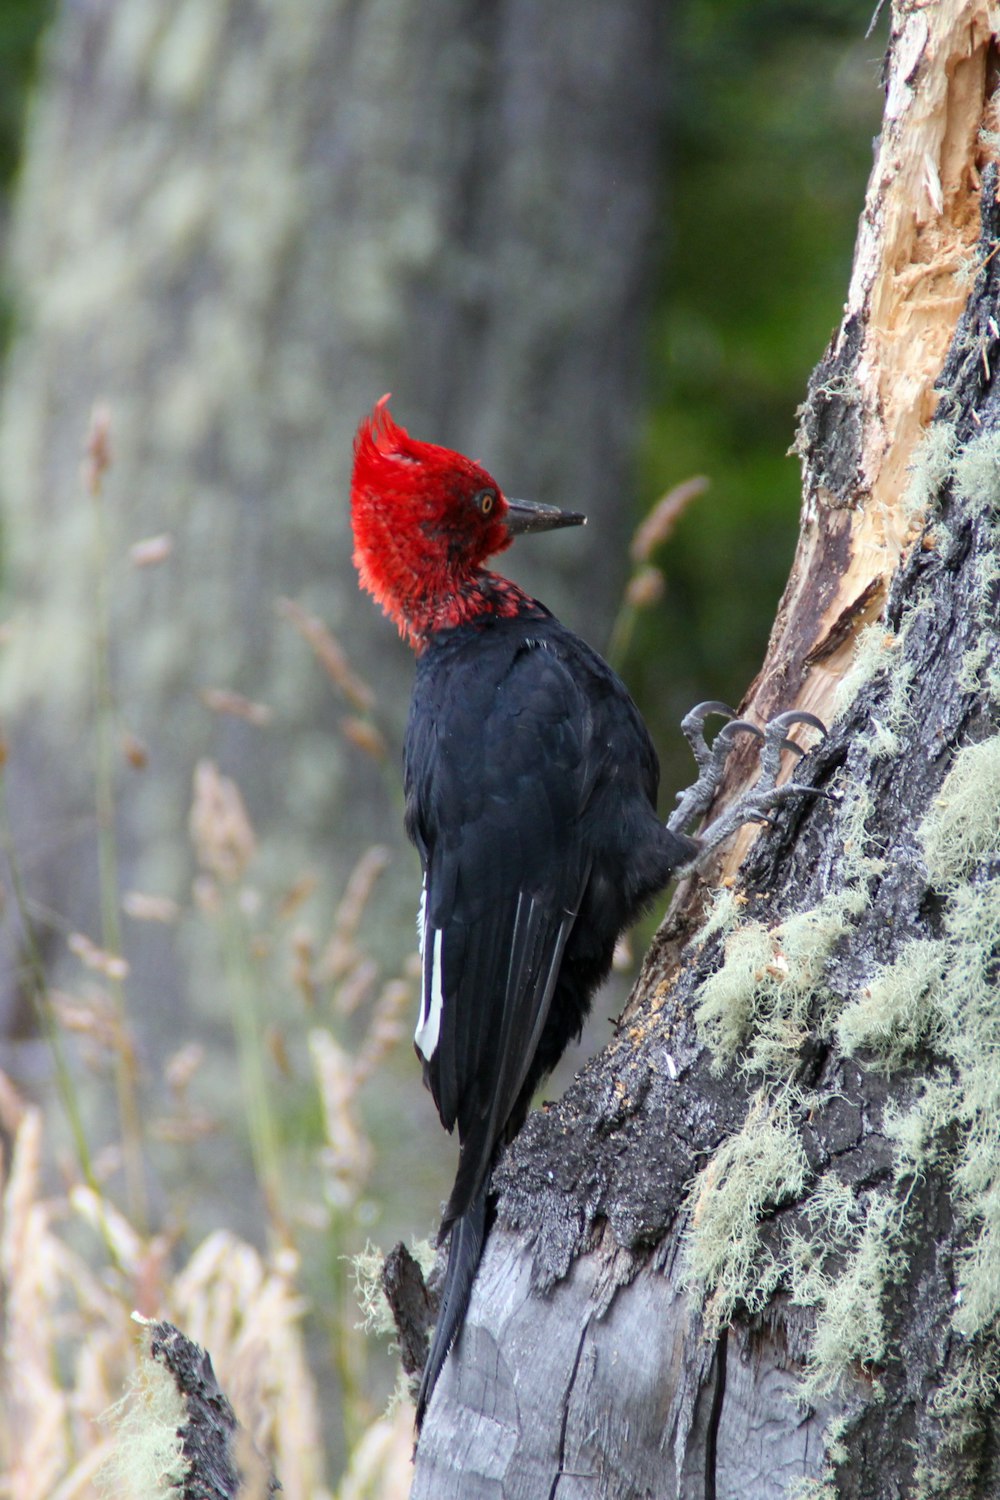 black and red bird on tree branch during daytime